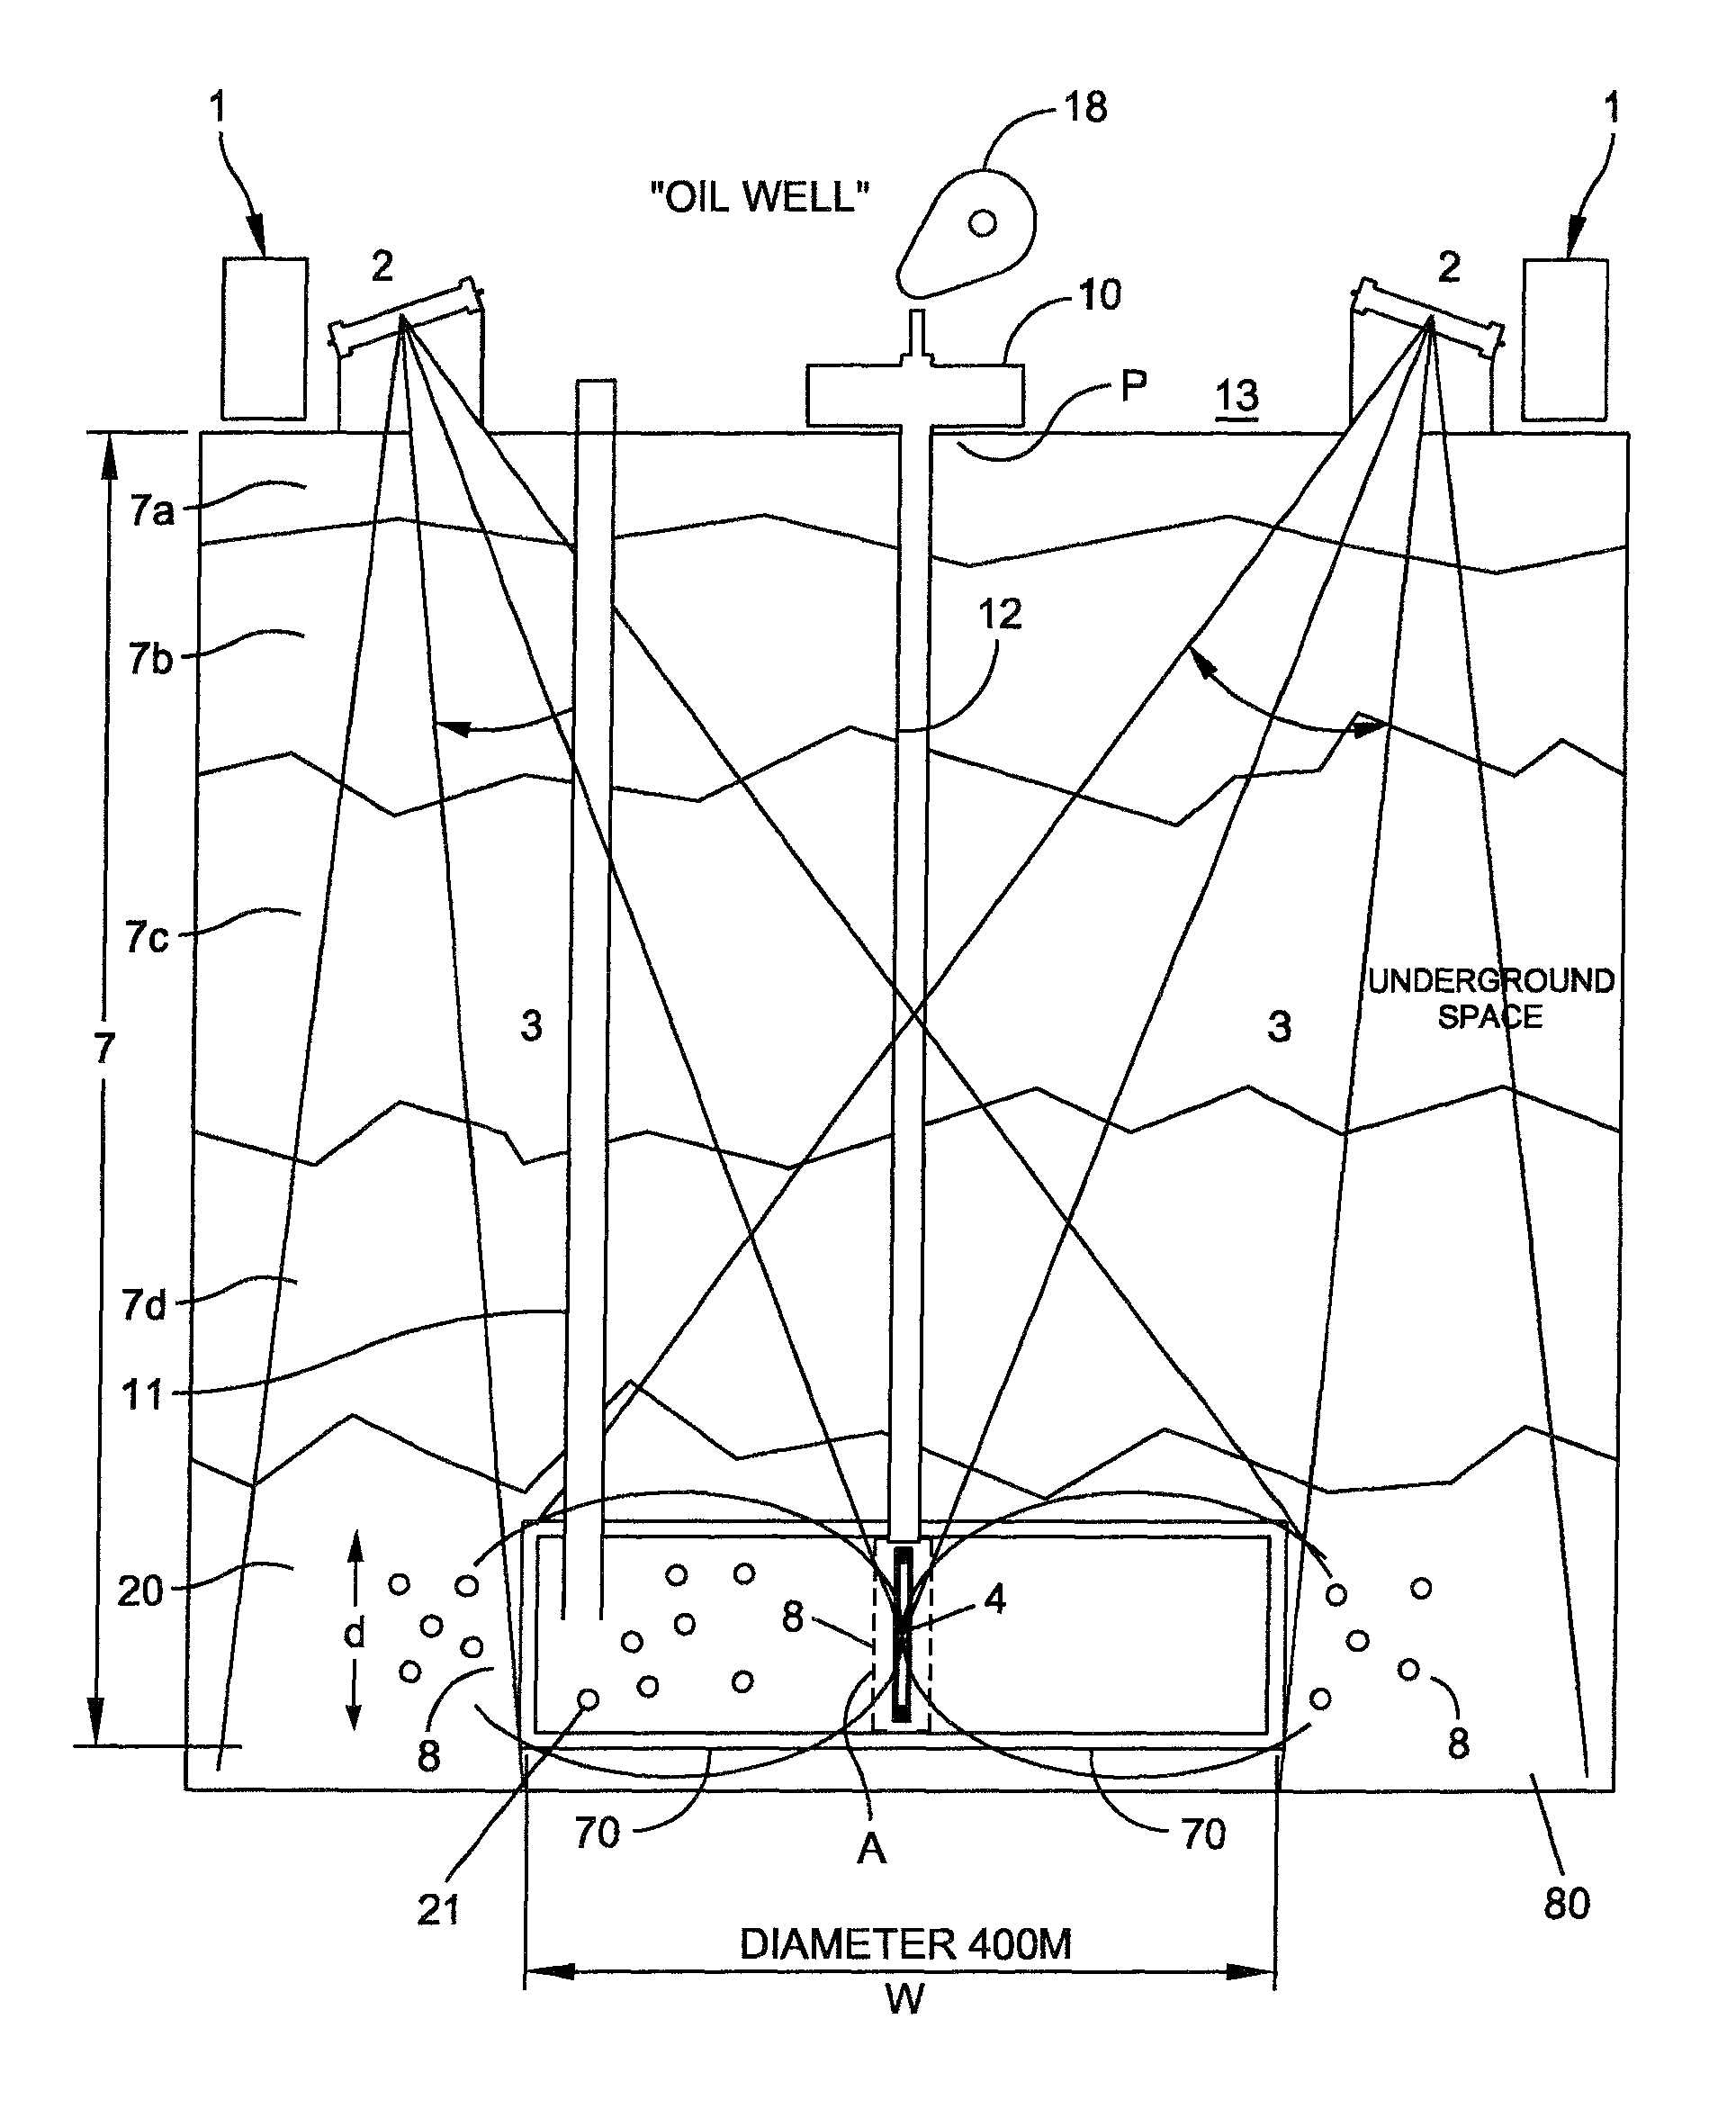 System and method to remotely interact with nano devices in an oil well and/or water reservoir using electromagnetic transmission